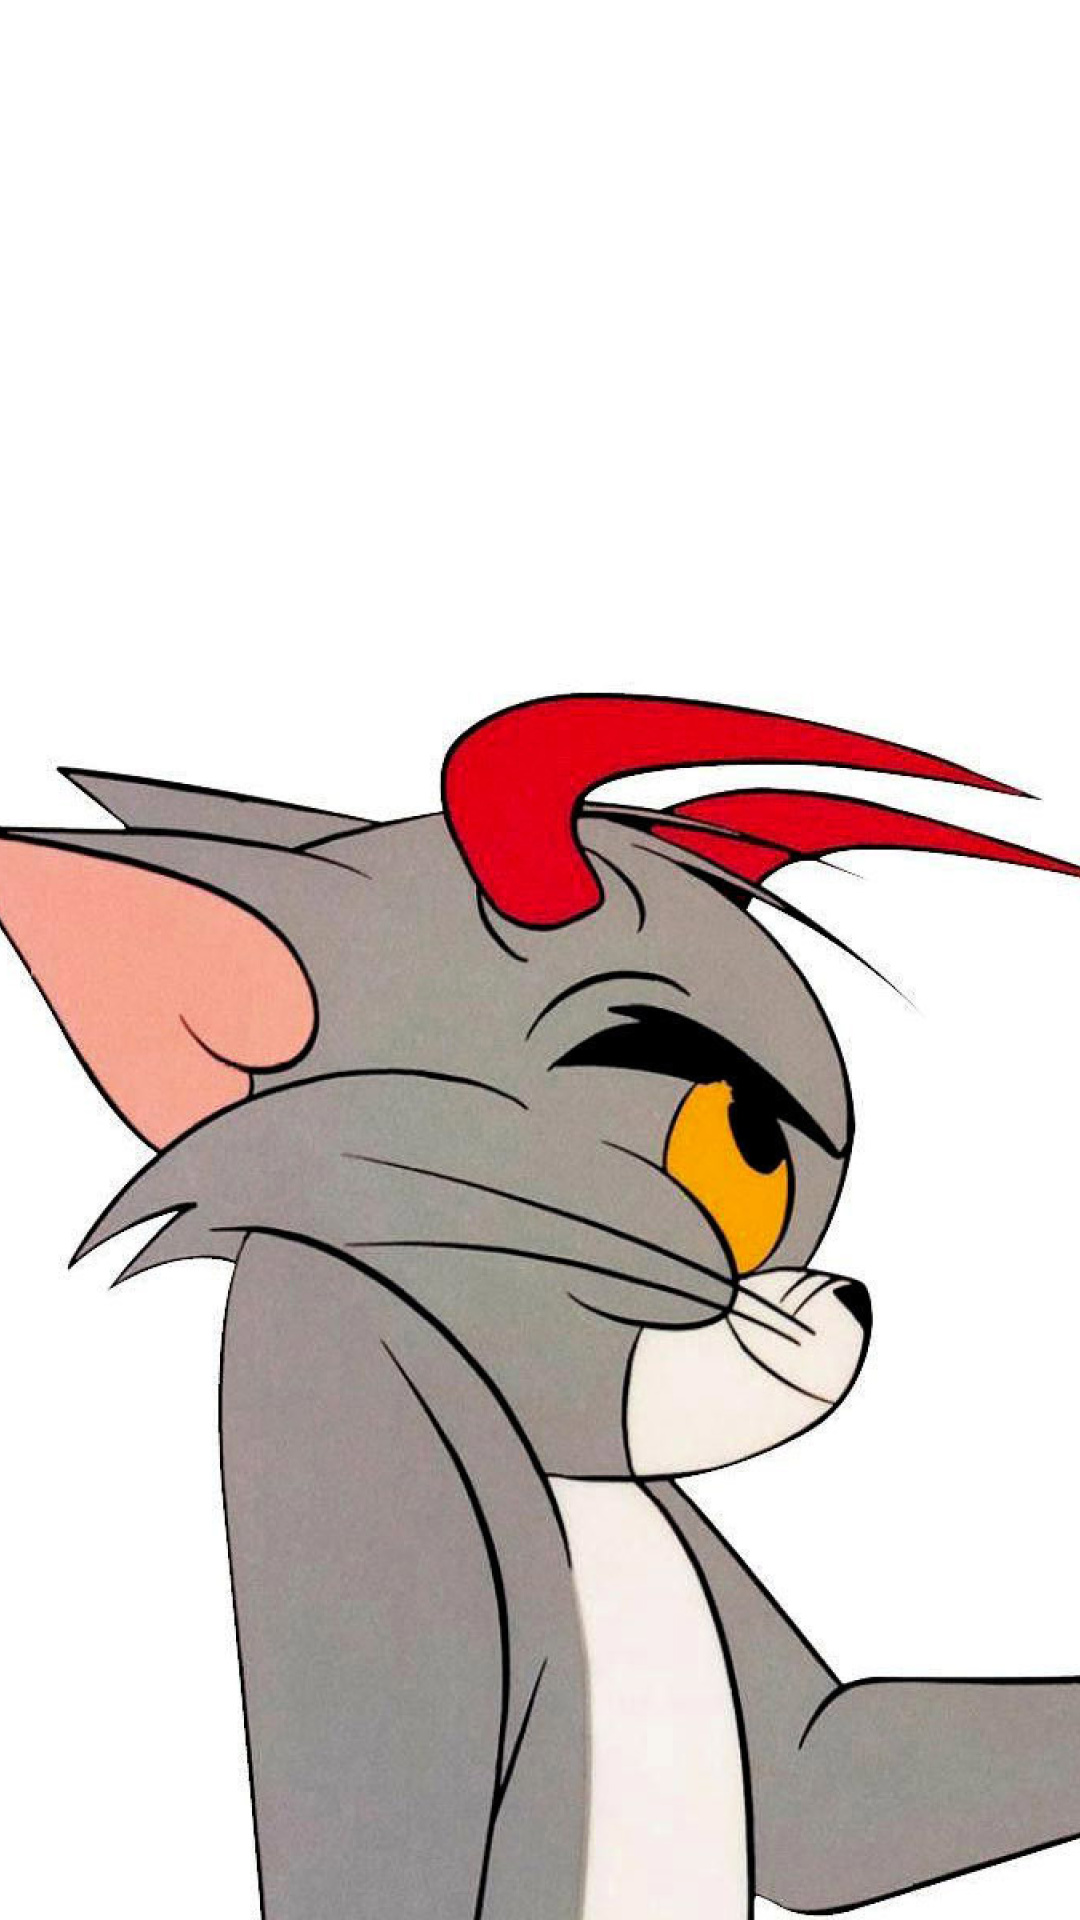 Tom and Jerry wallpaper 1080x1920